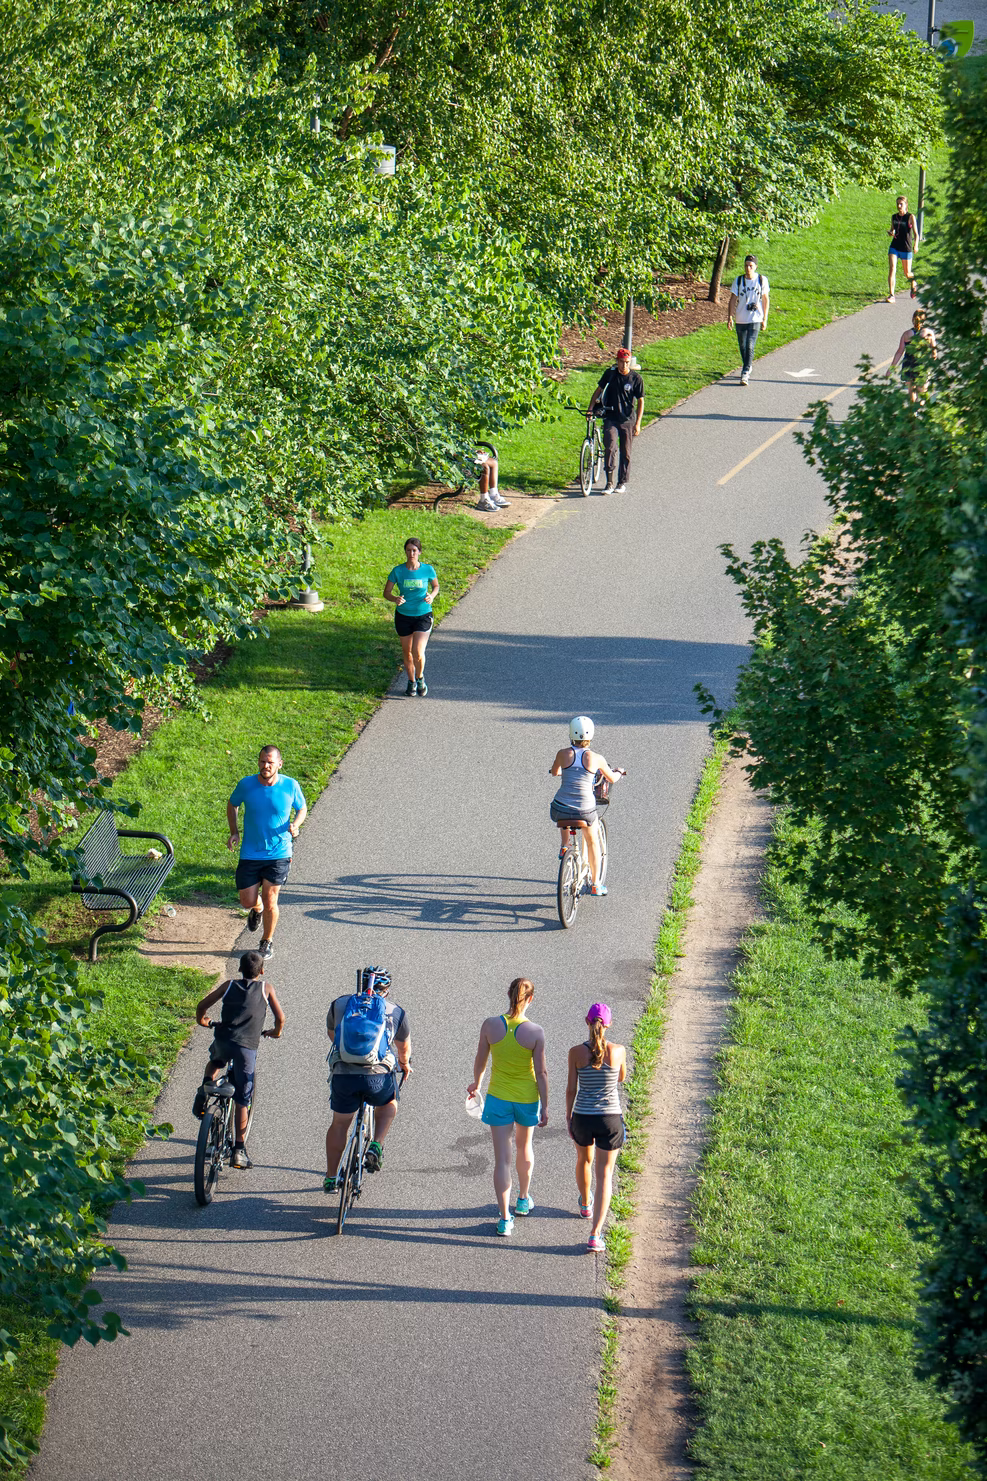 A path where people are walking, biking, and jogging through the trees.